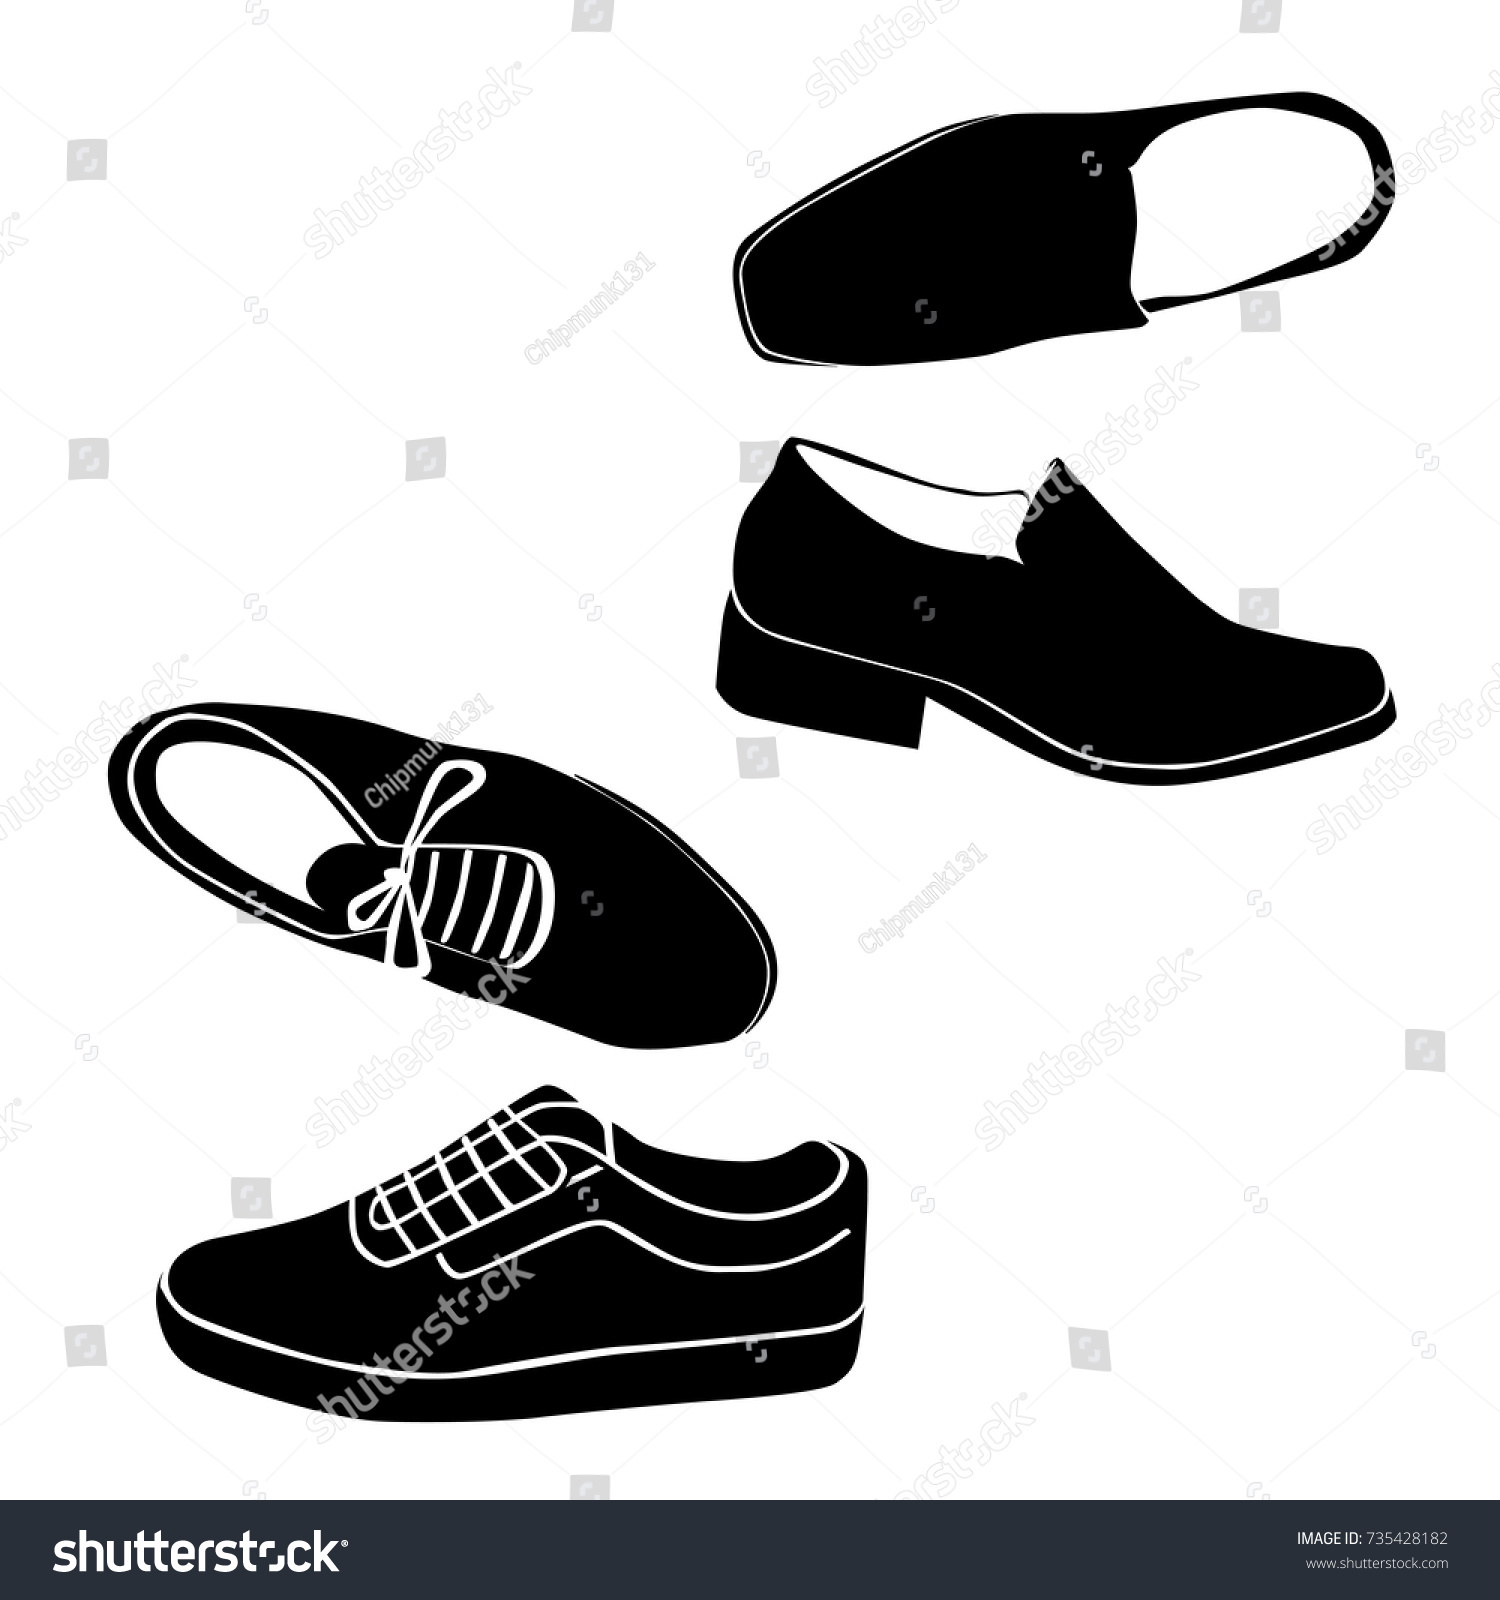 black sports shoes for office